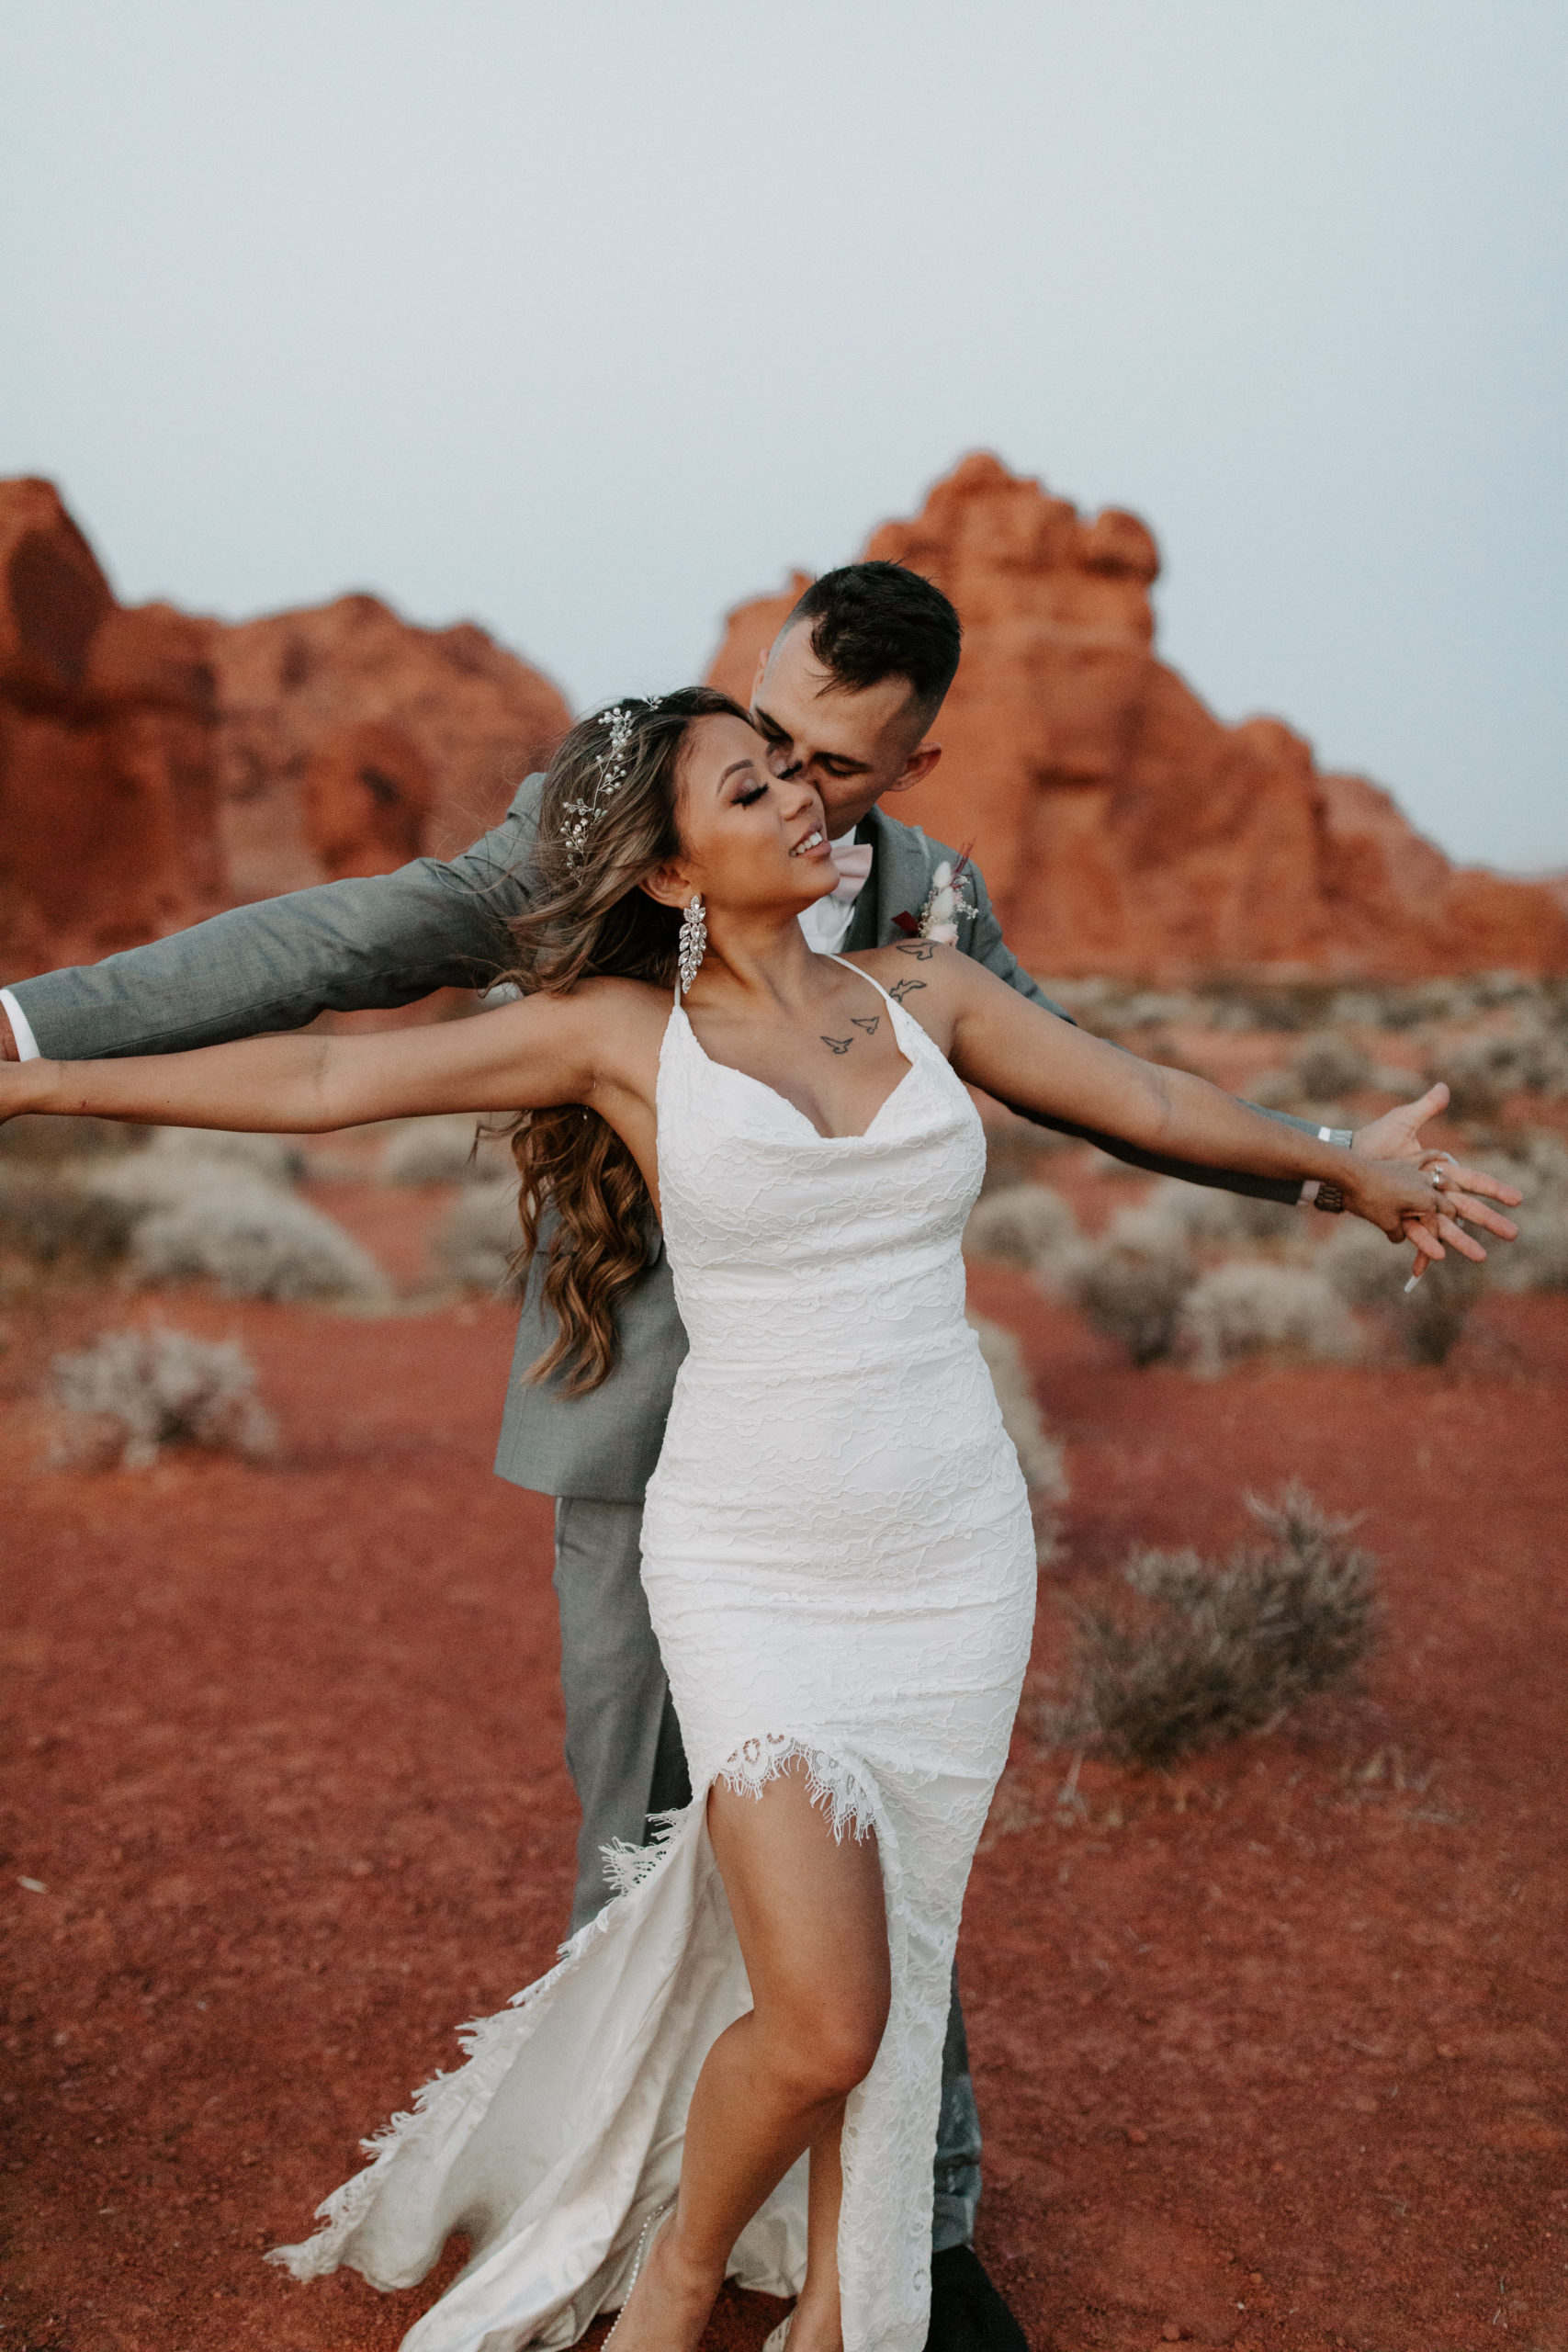 Newlyweds holding arms out and dancing in desert 